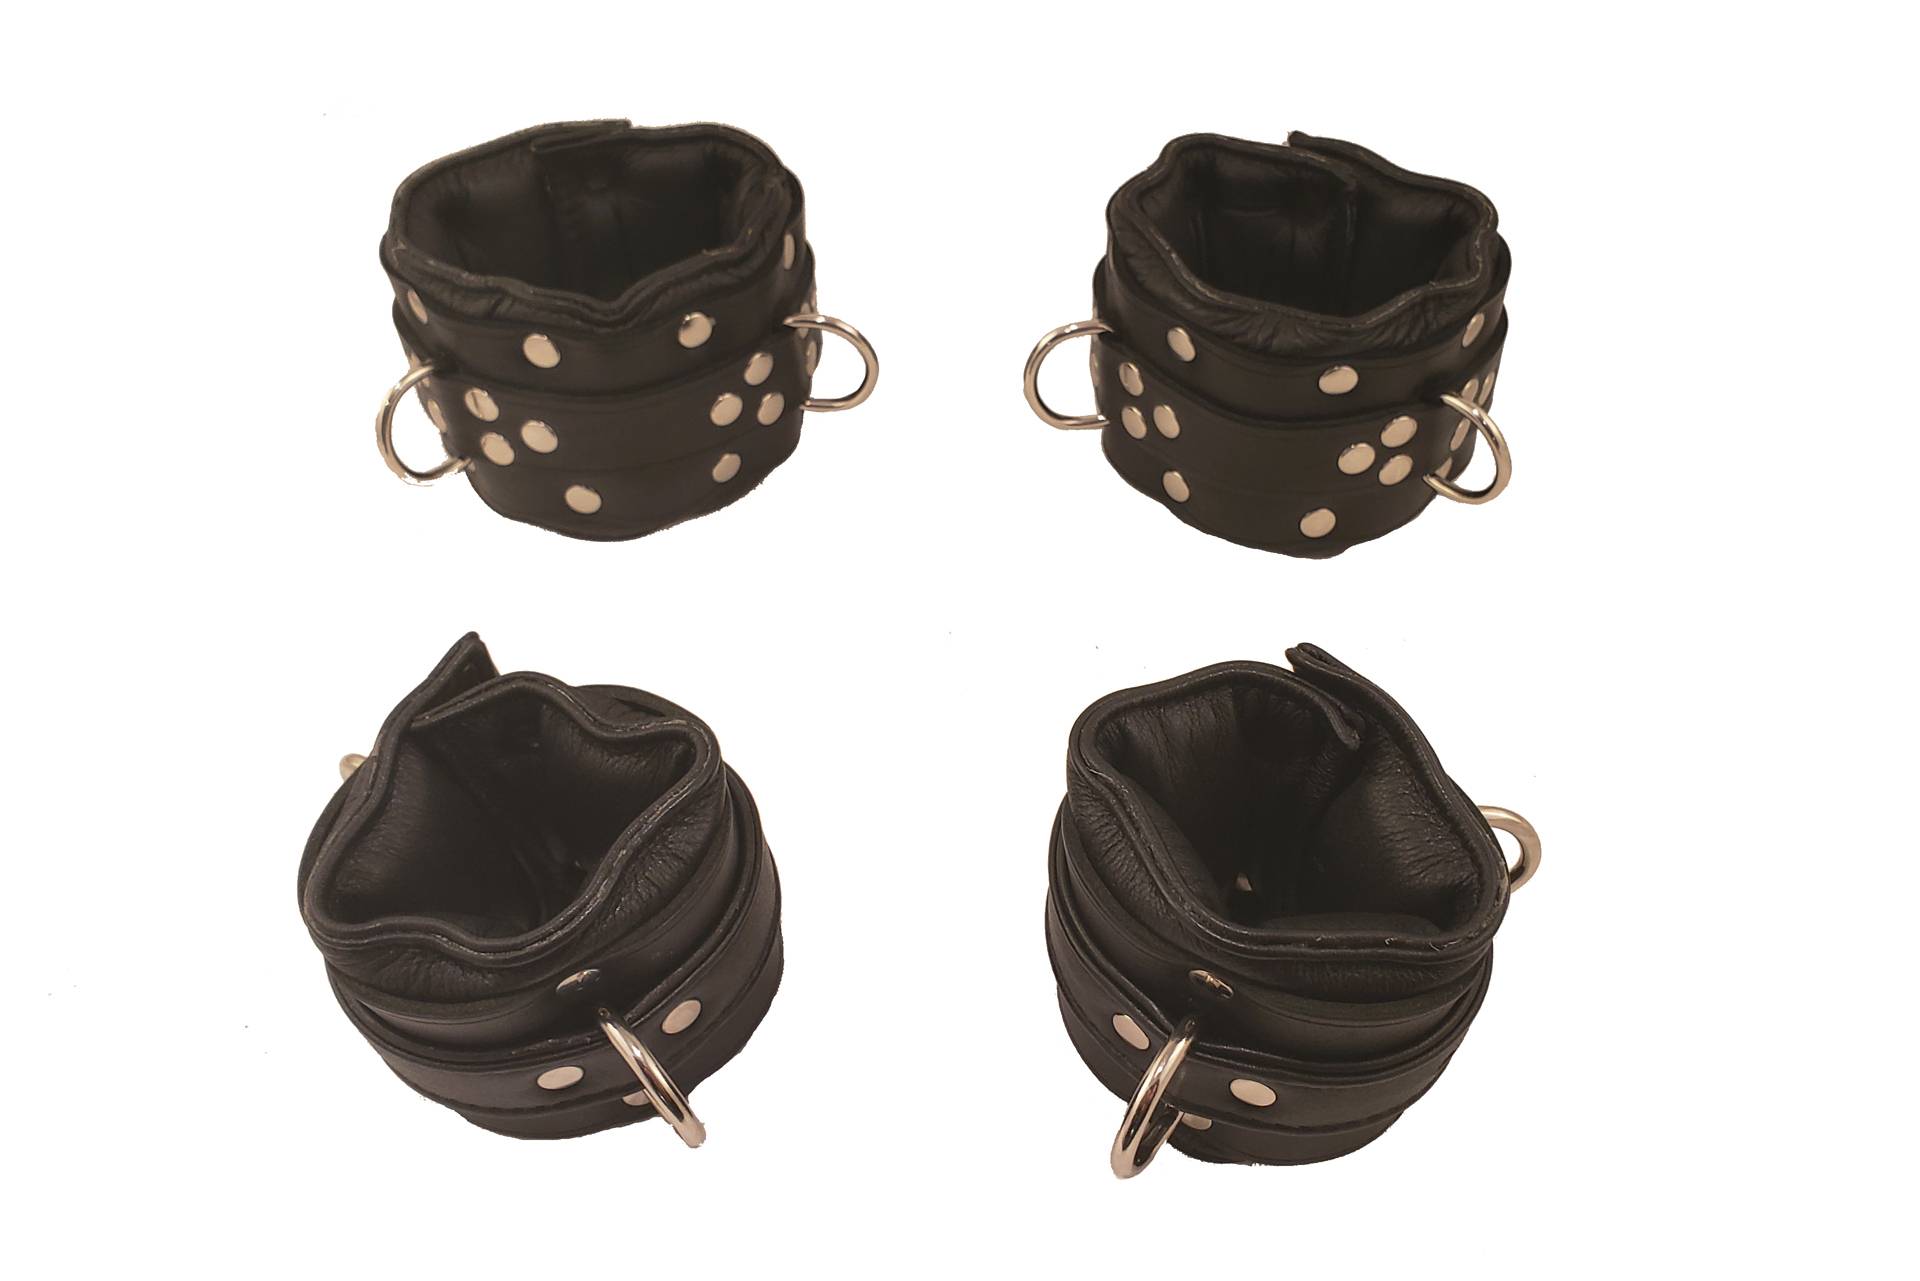 Locking Padded Leather Posture Collar - House of Basciano